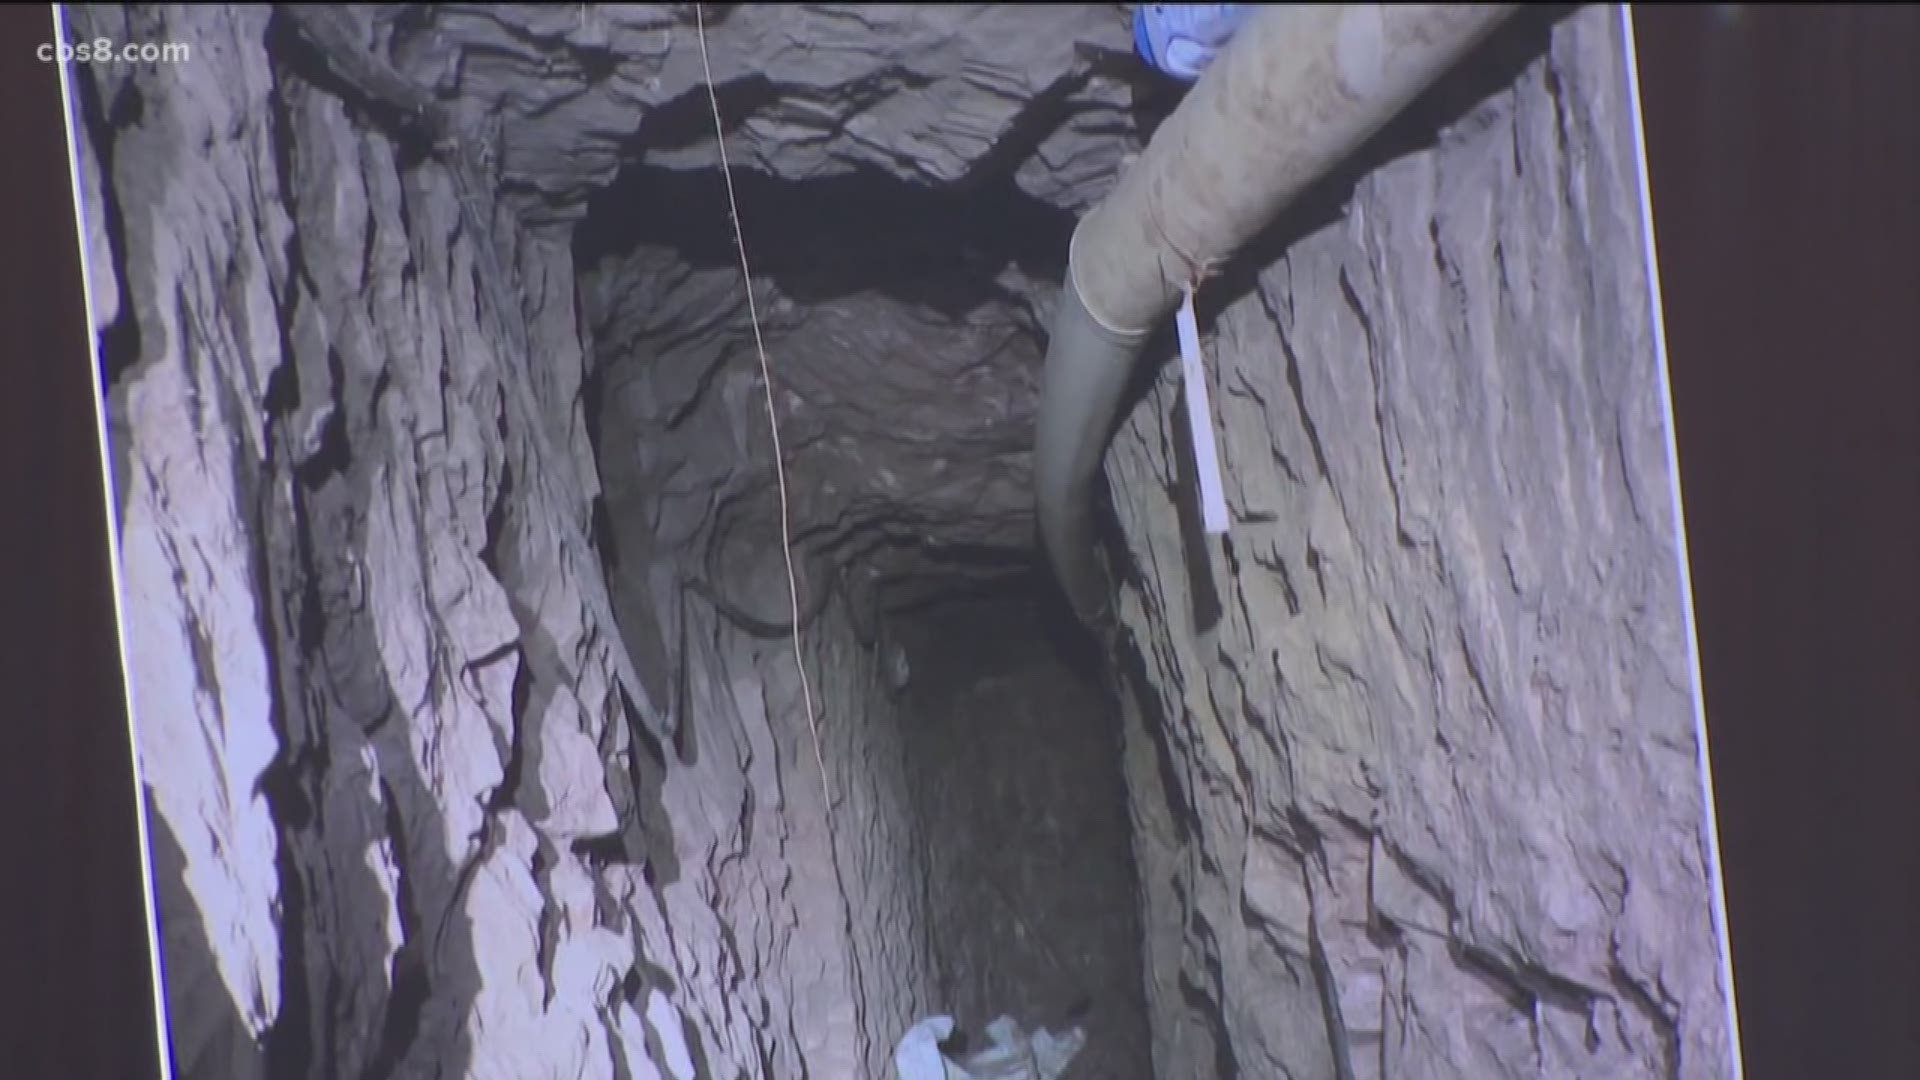 Investigators say it was a sophisticated tunnel with electricity and an elevator.